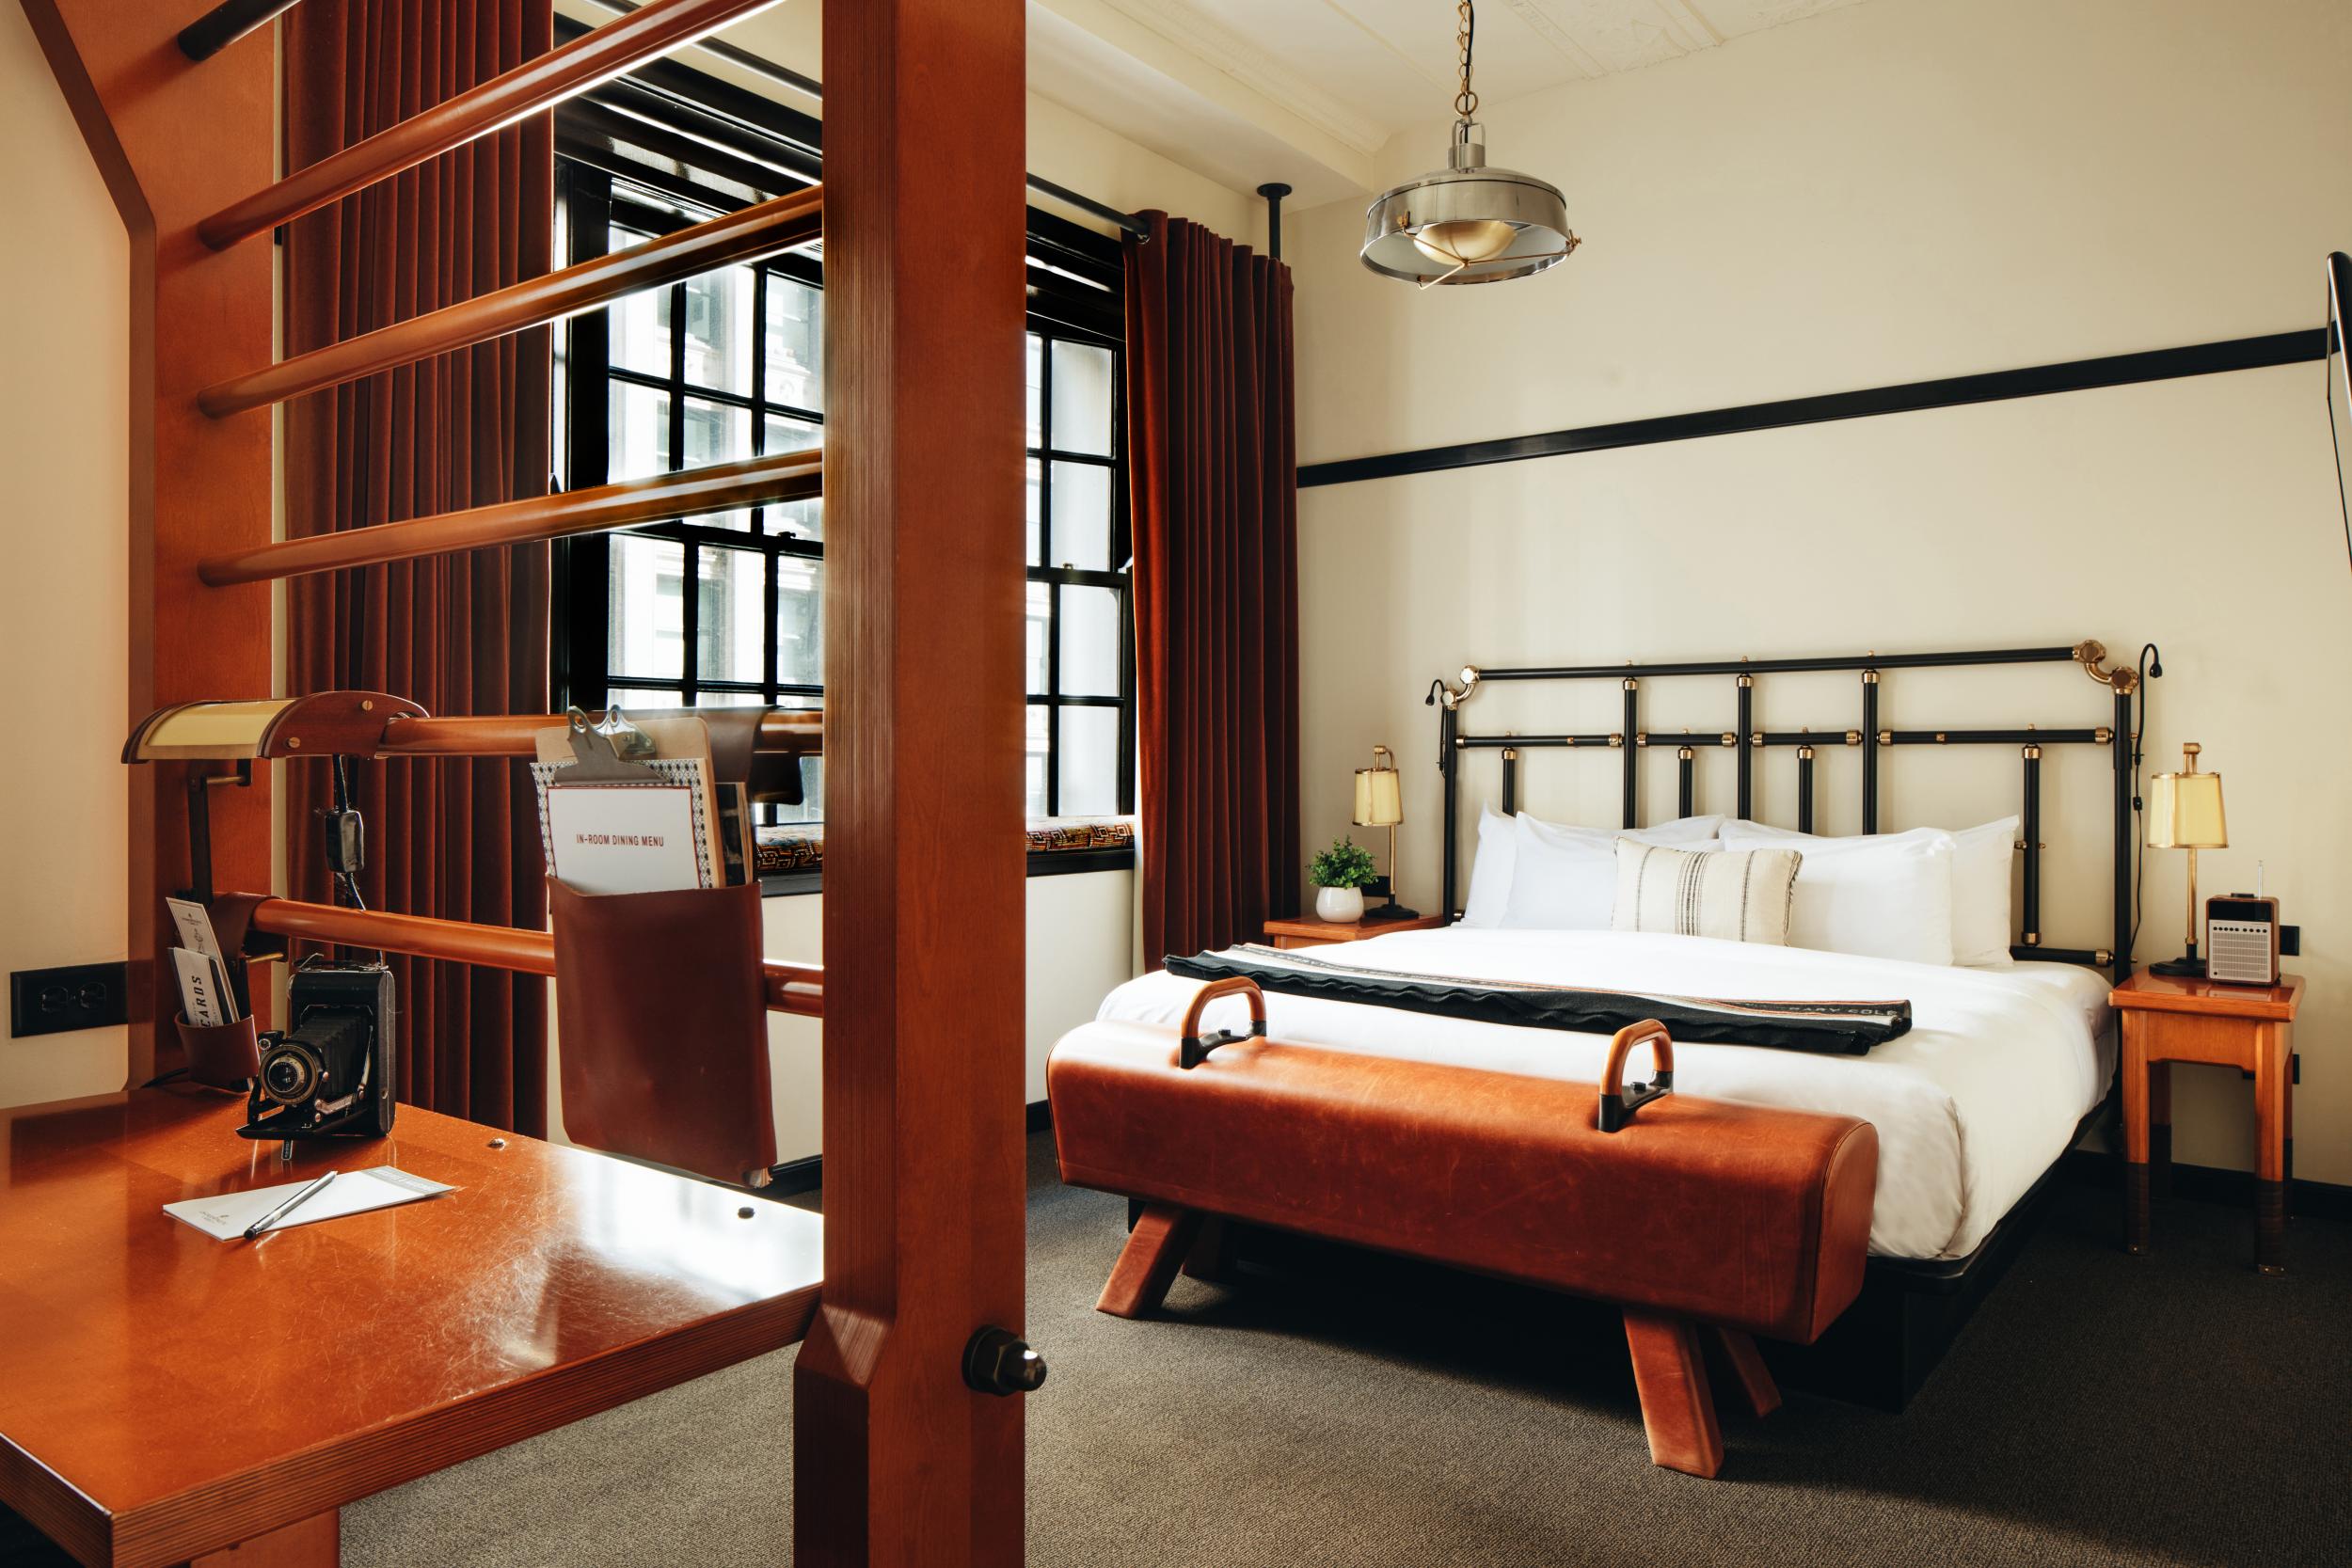 Once an exclusive men’s sporting club, now one of the coolest places to stay in the windy city